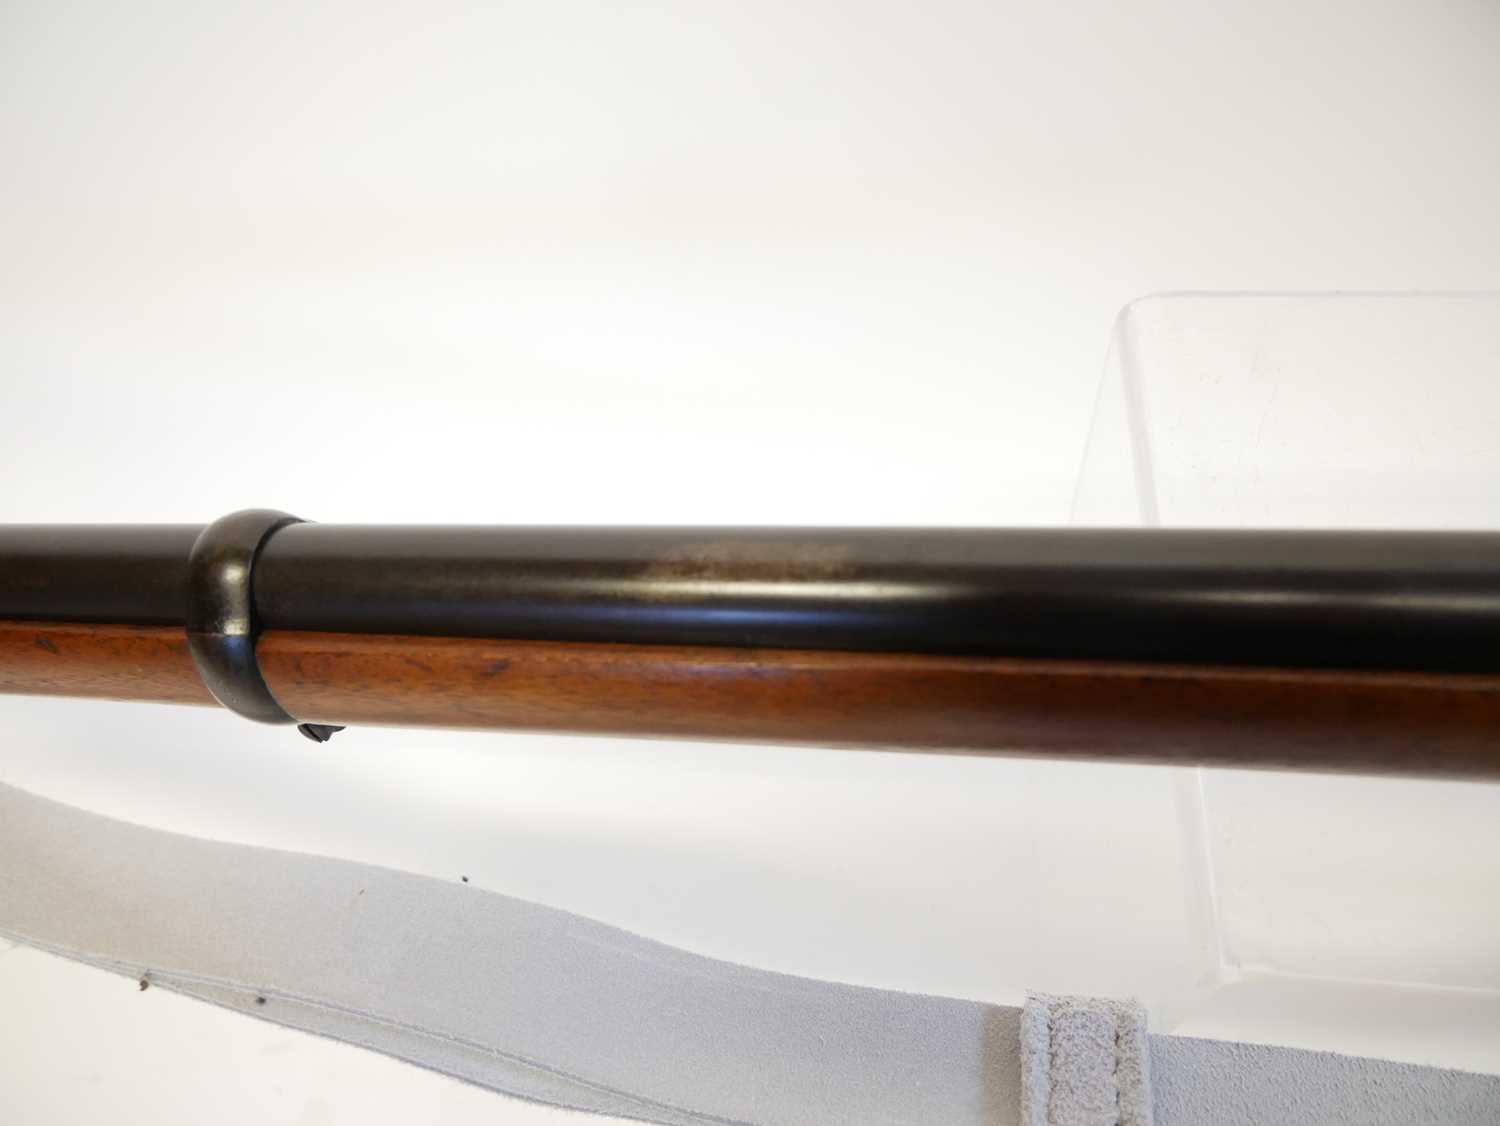 Enfield MkII* three band.577 Snider rifle, 36inch barrel fitted with bayonet lug and folding - Image 16 of 17